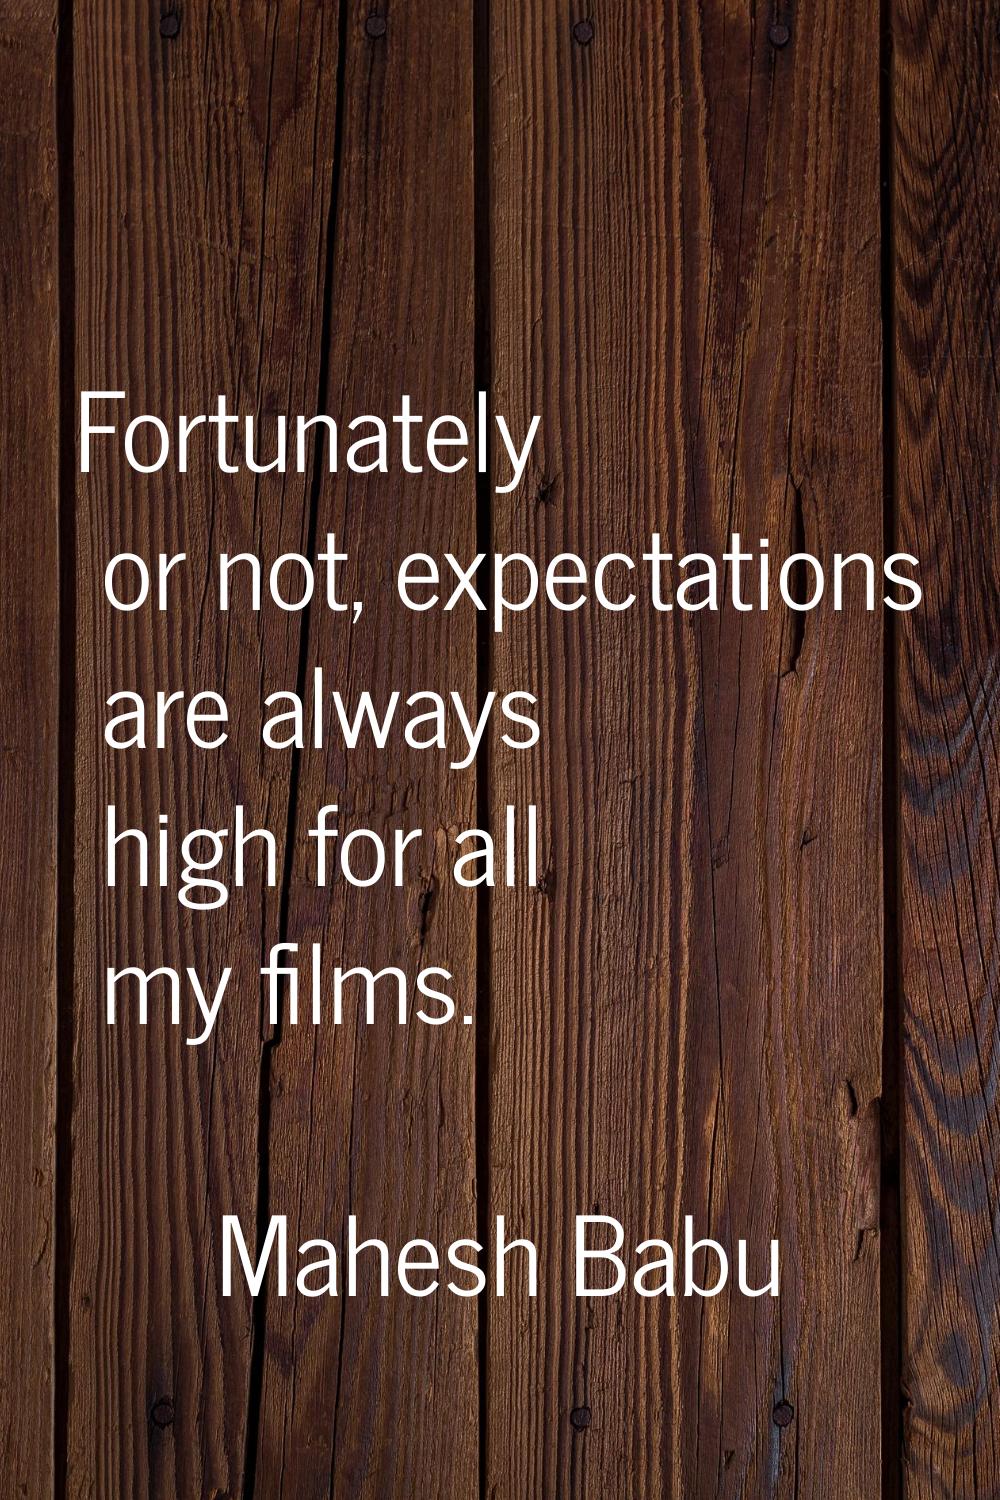 Fortunately or not, expectations are always high for all my films.